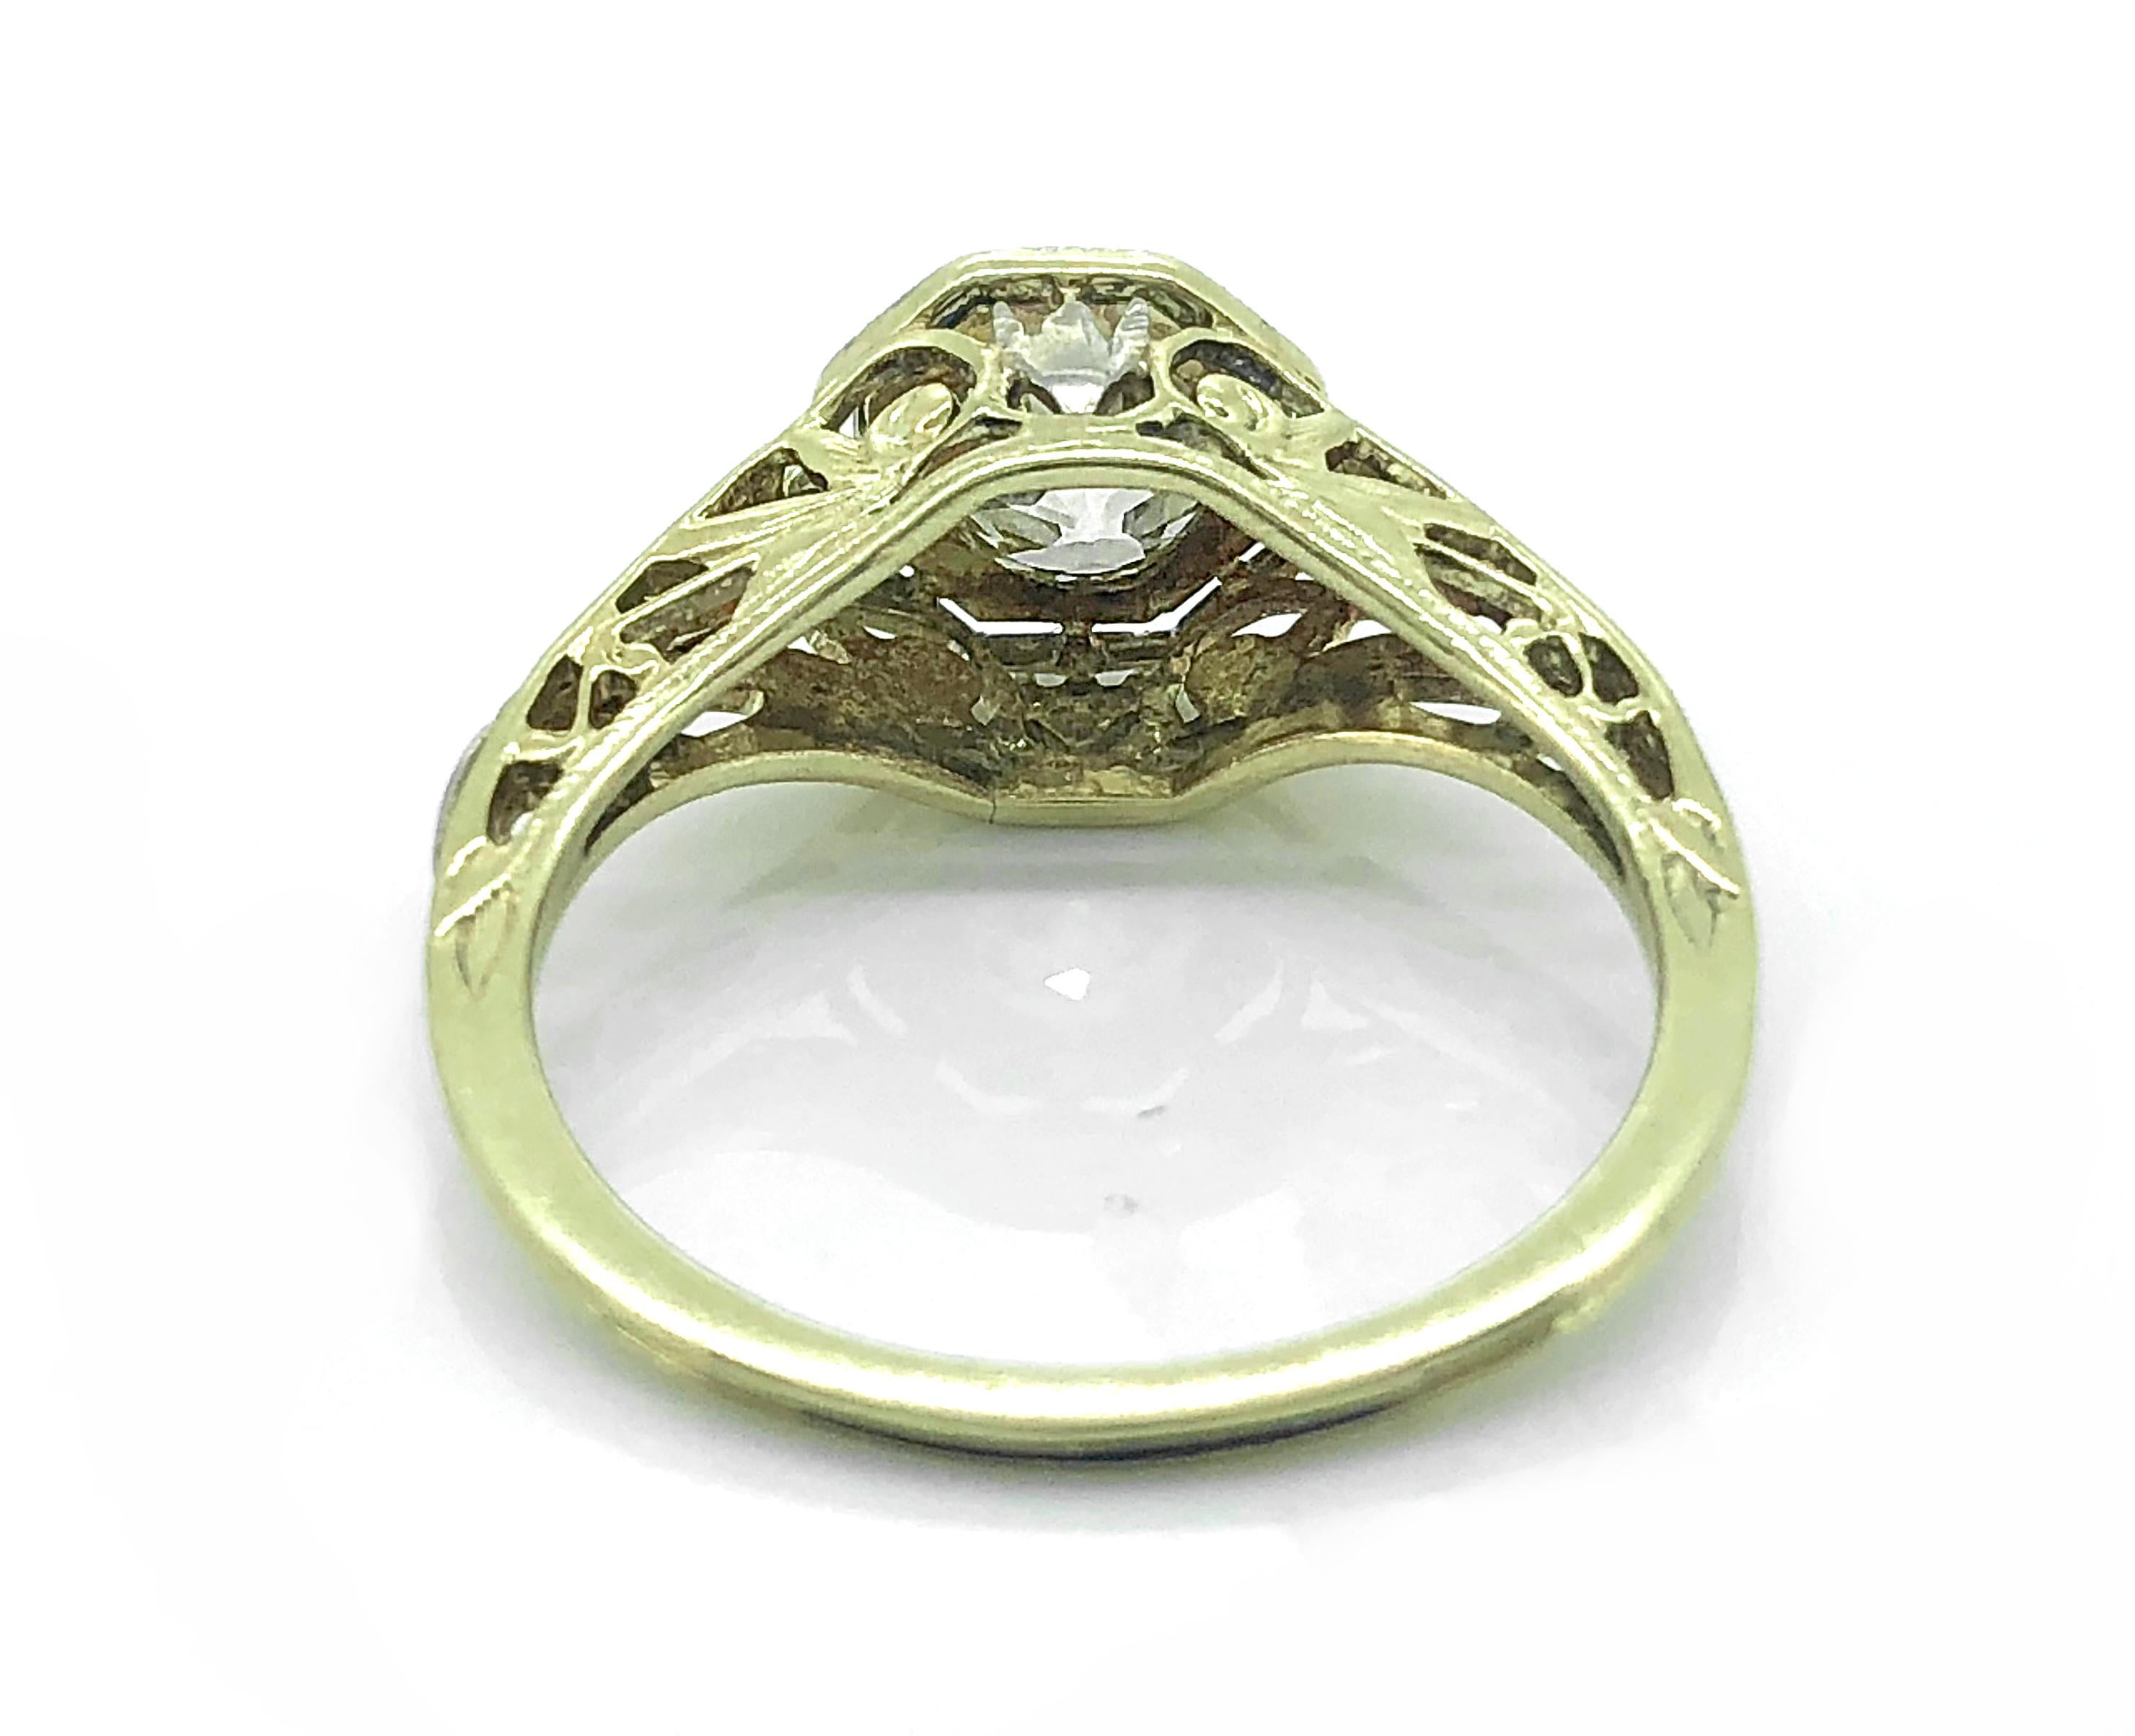 Old European Cut Art Deco Antique Engagement Ring 80 Carat Diamond, White and Yellow Gold, J35934 For Sale